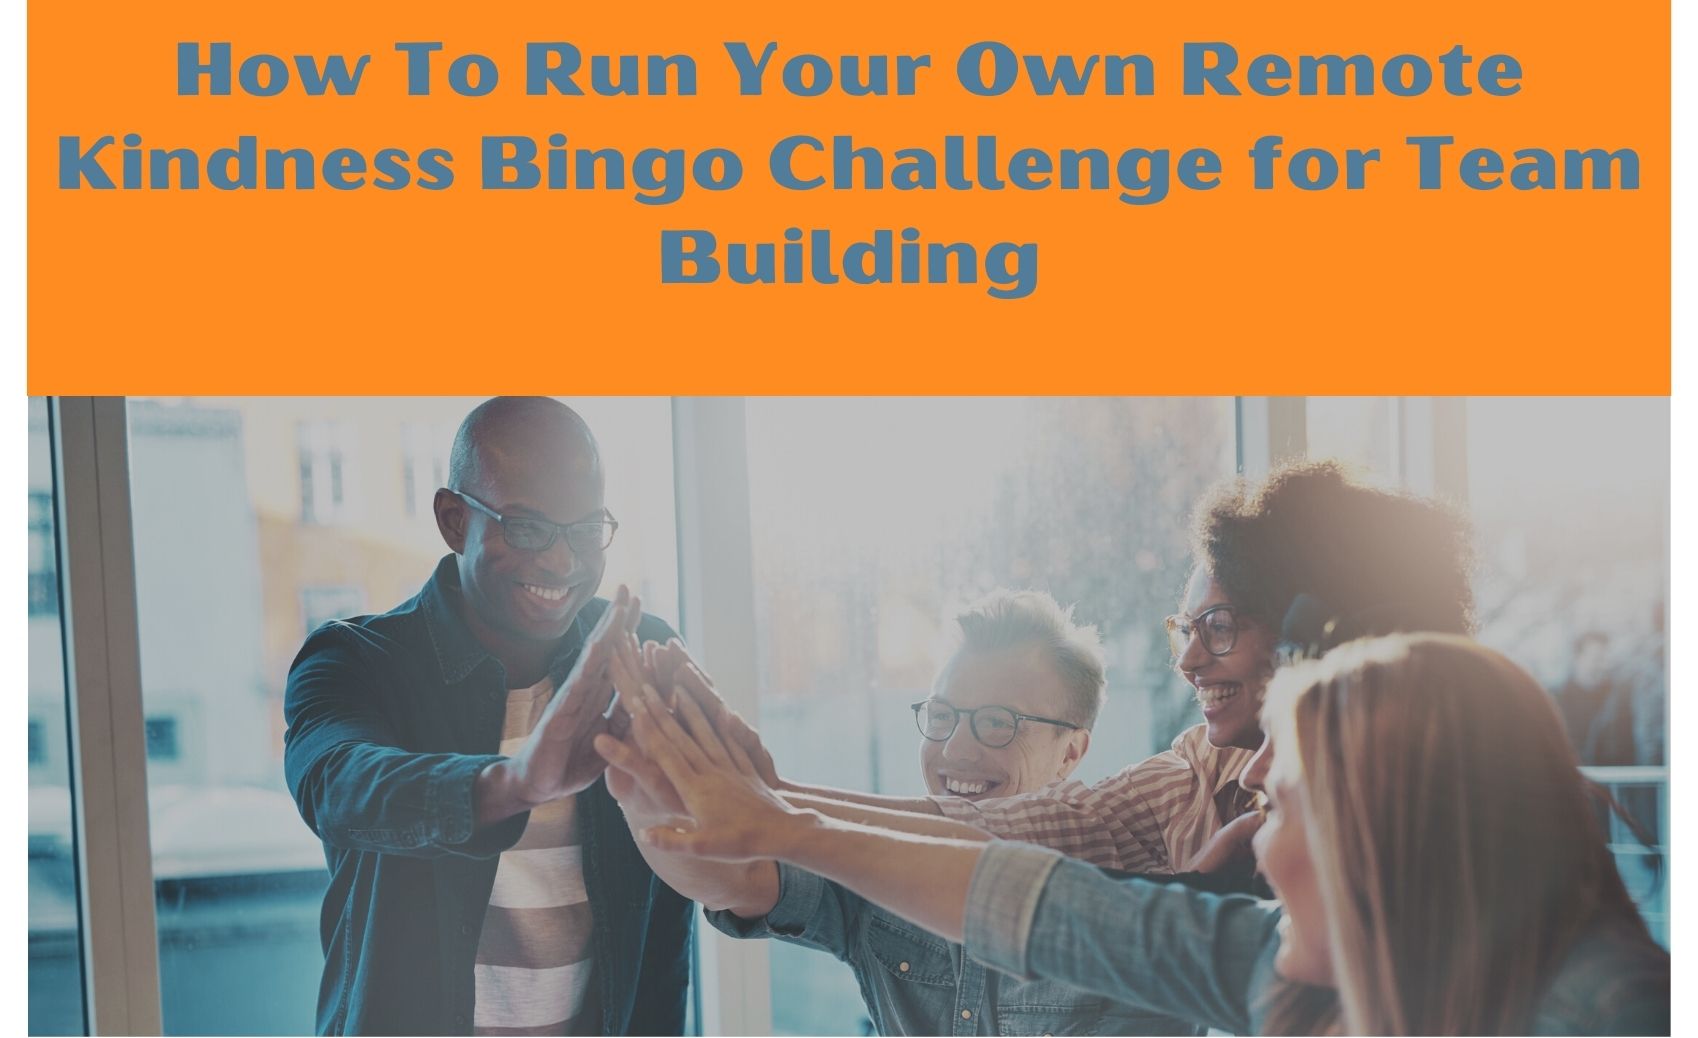 How To Run Your Own Remote Kindness Bingo Challenge for Team Building